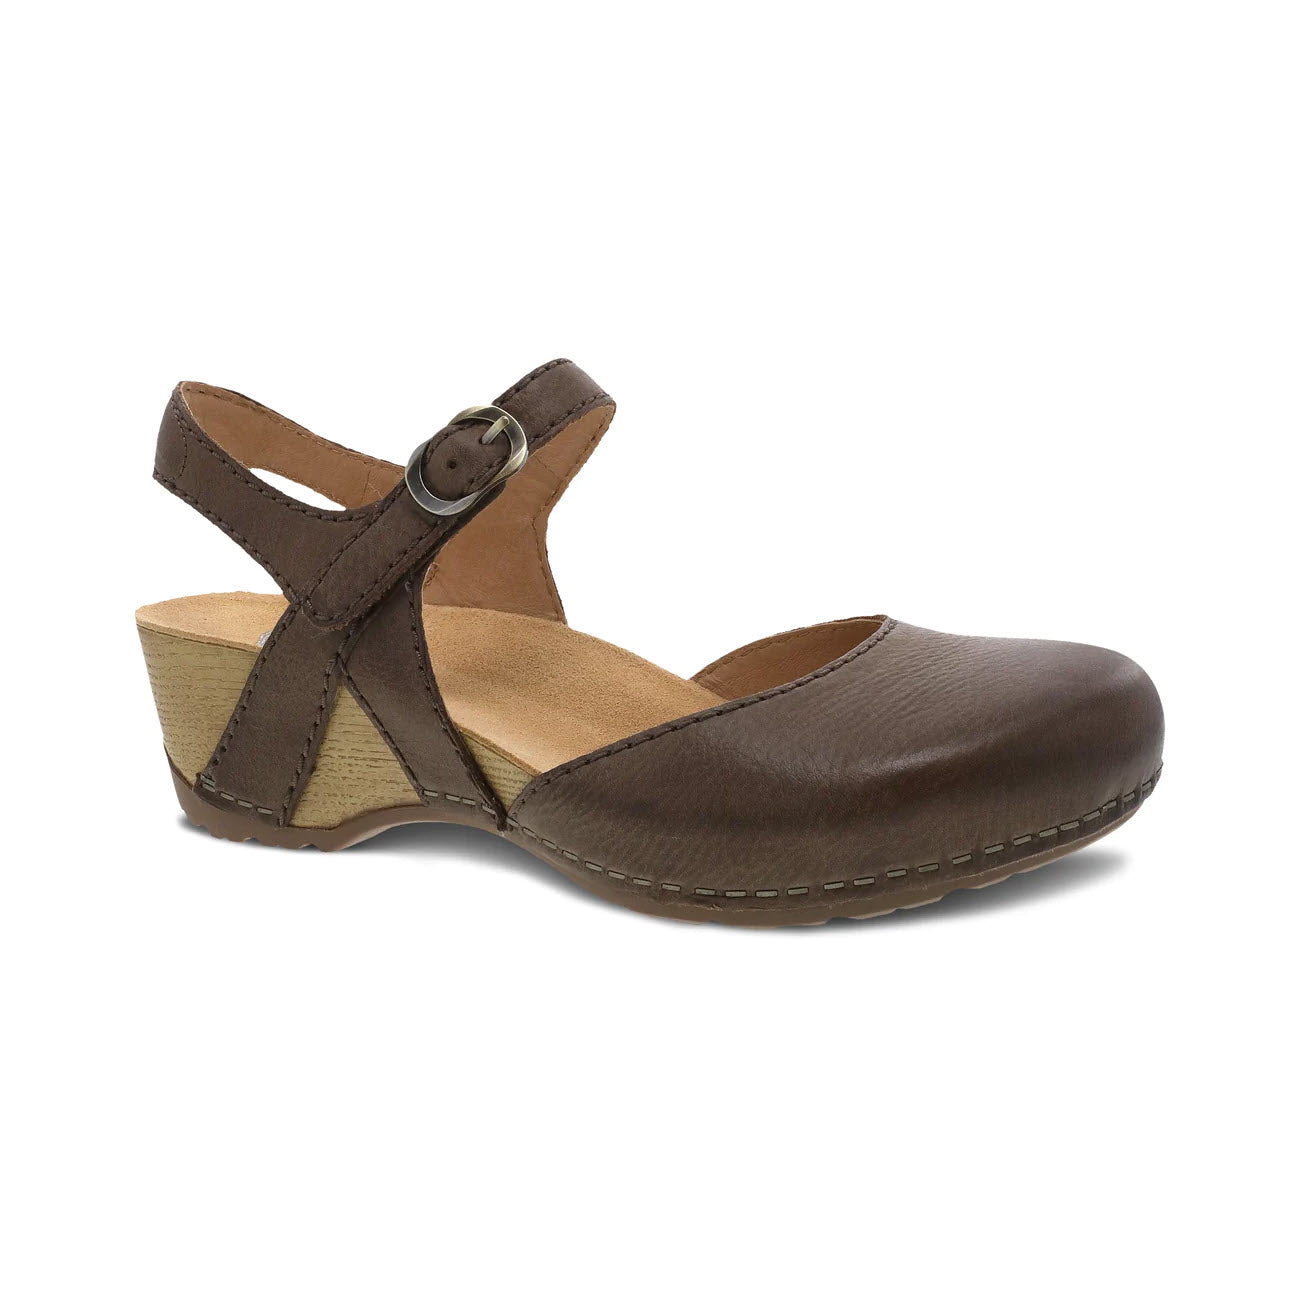 Dansko brown leather ankle-strap closed toe sandal with chunky heel.